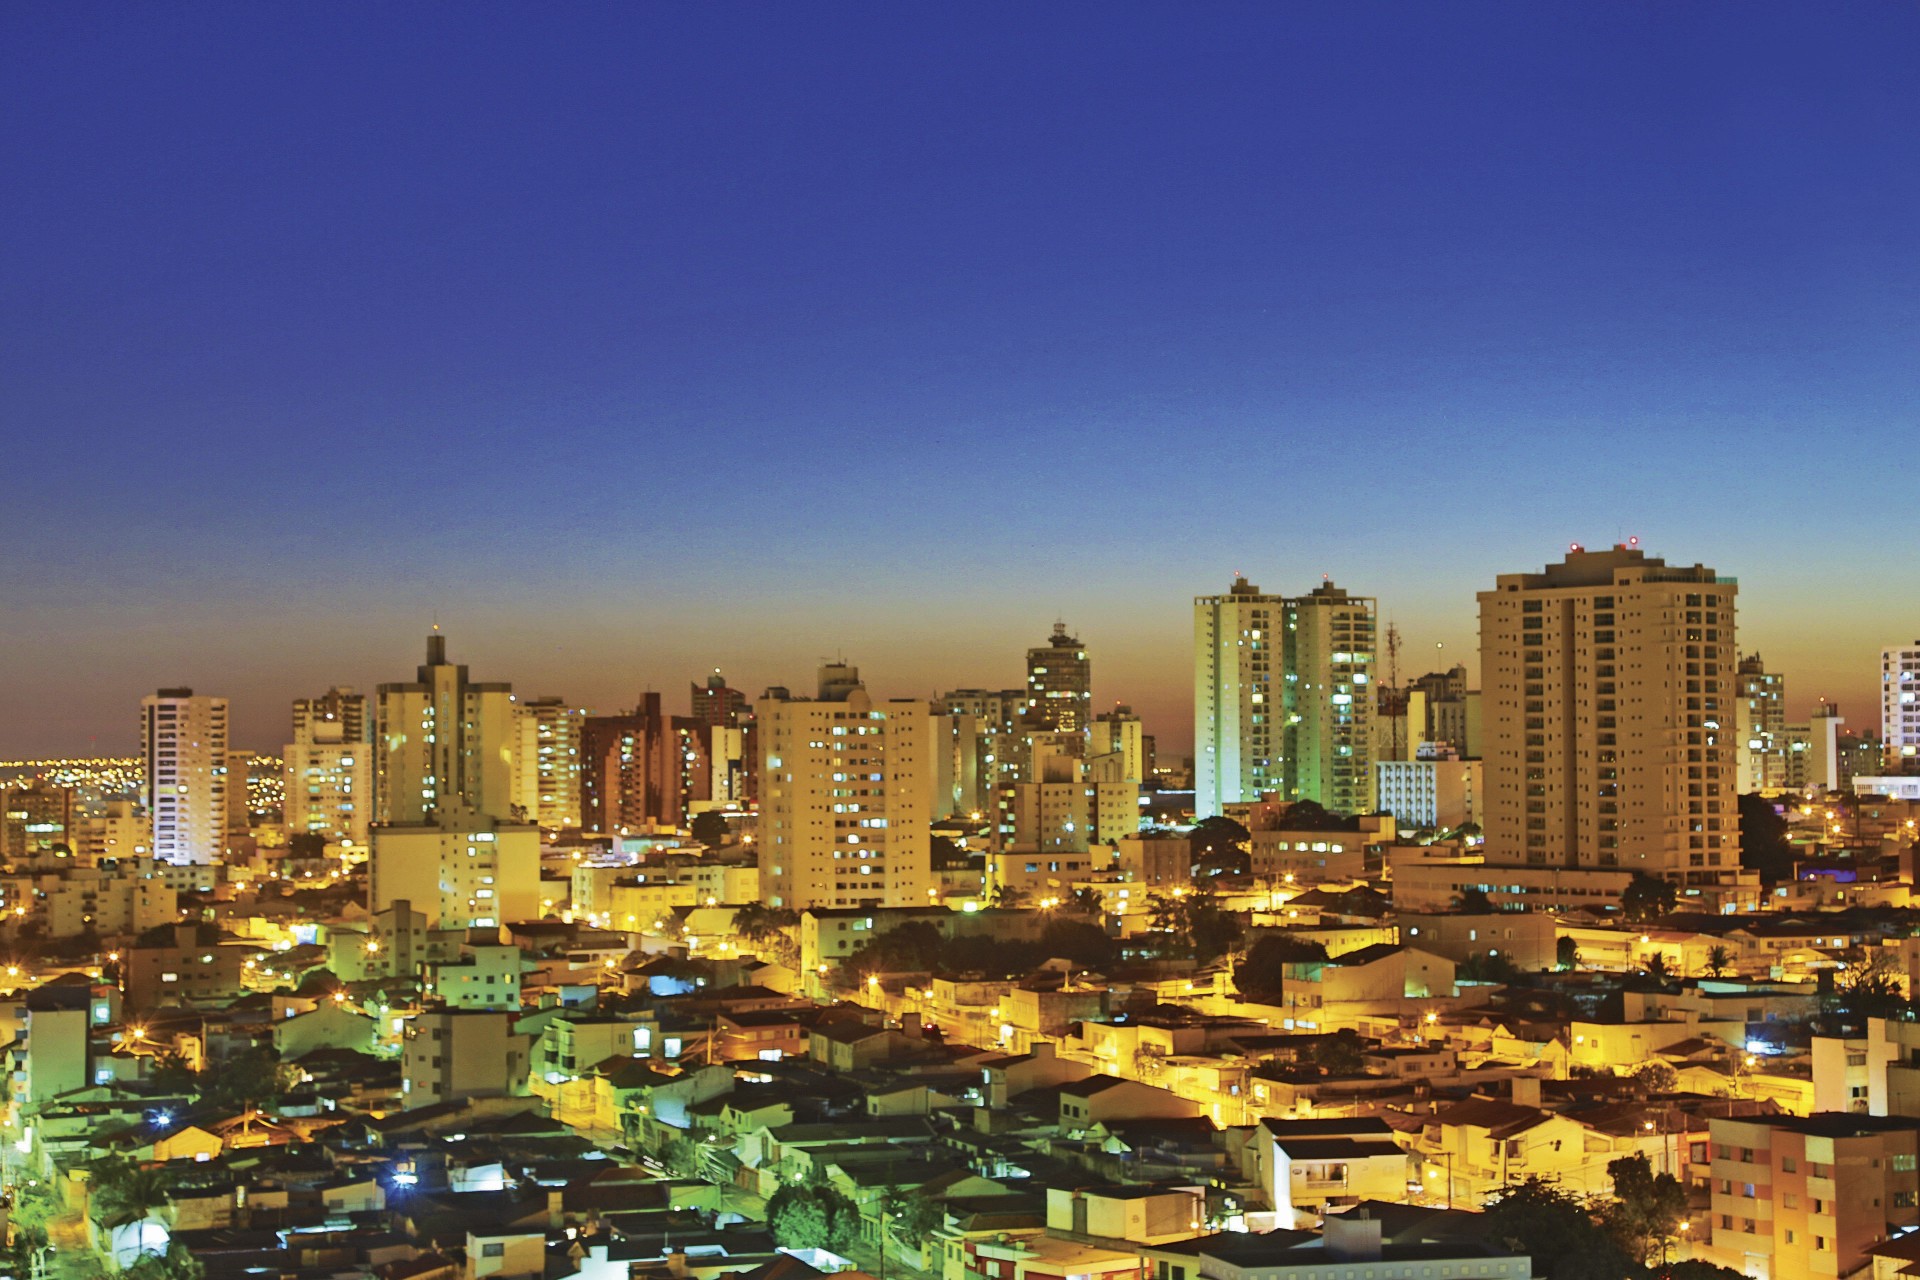 38-facts-about-uberlandia